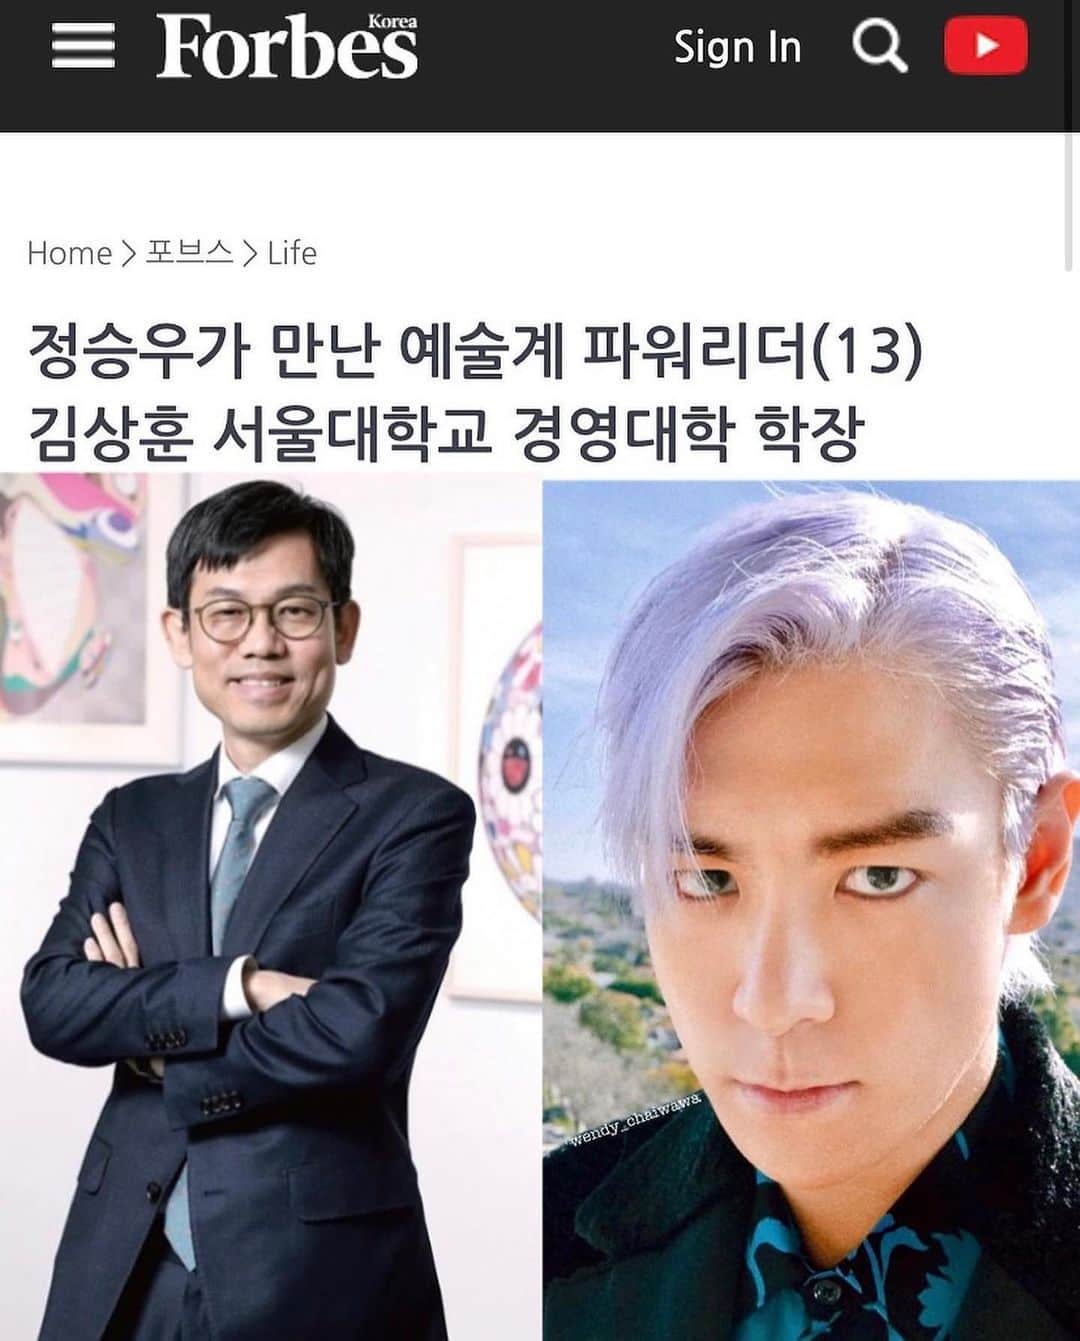 T.O.Pのインスタグラム：「Mr. Kim Sang-hoon, Dean of the College of Business Administration of Seoul National University, specifically mentioned TOP in the interview. "Mr. Choi Seung-hyun translated his English interview into Korean and uploaded it to social media, which received a huge number of views and helped promote Korea Art Market 2022. Above all, he is especially memorable because he is a true collector who knows and understands art."  Link: http://jmagazine.joins.com/forbes/view/337695」